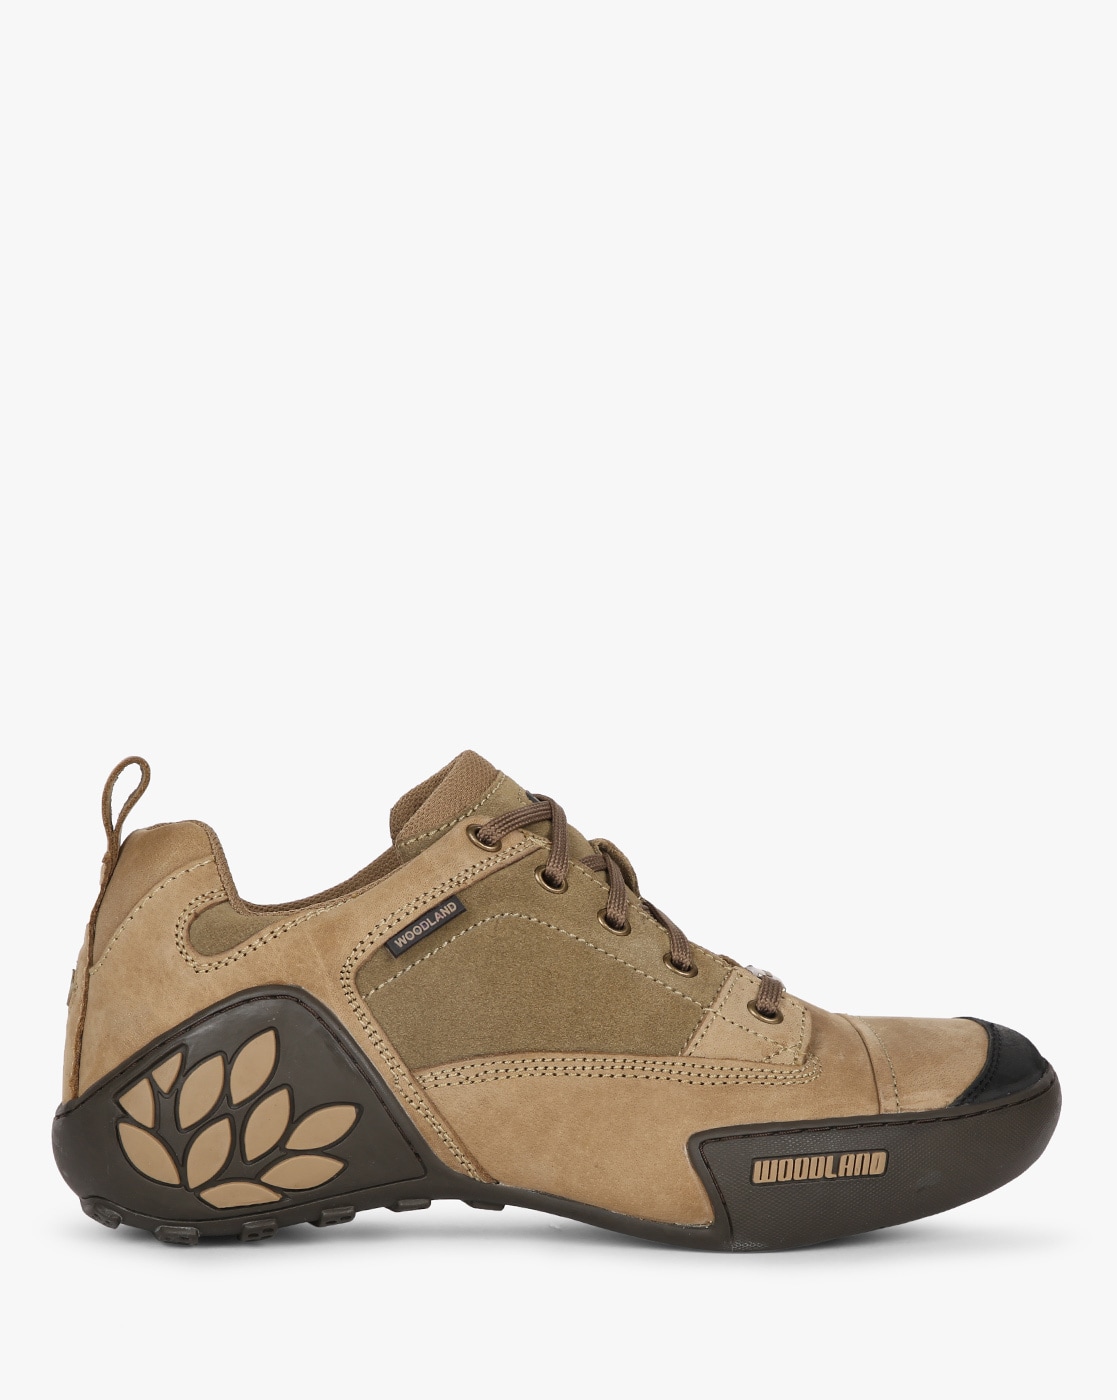 woodland outdoor shoes